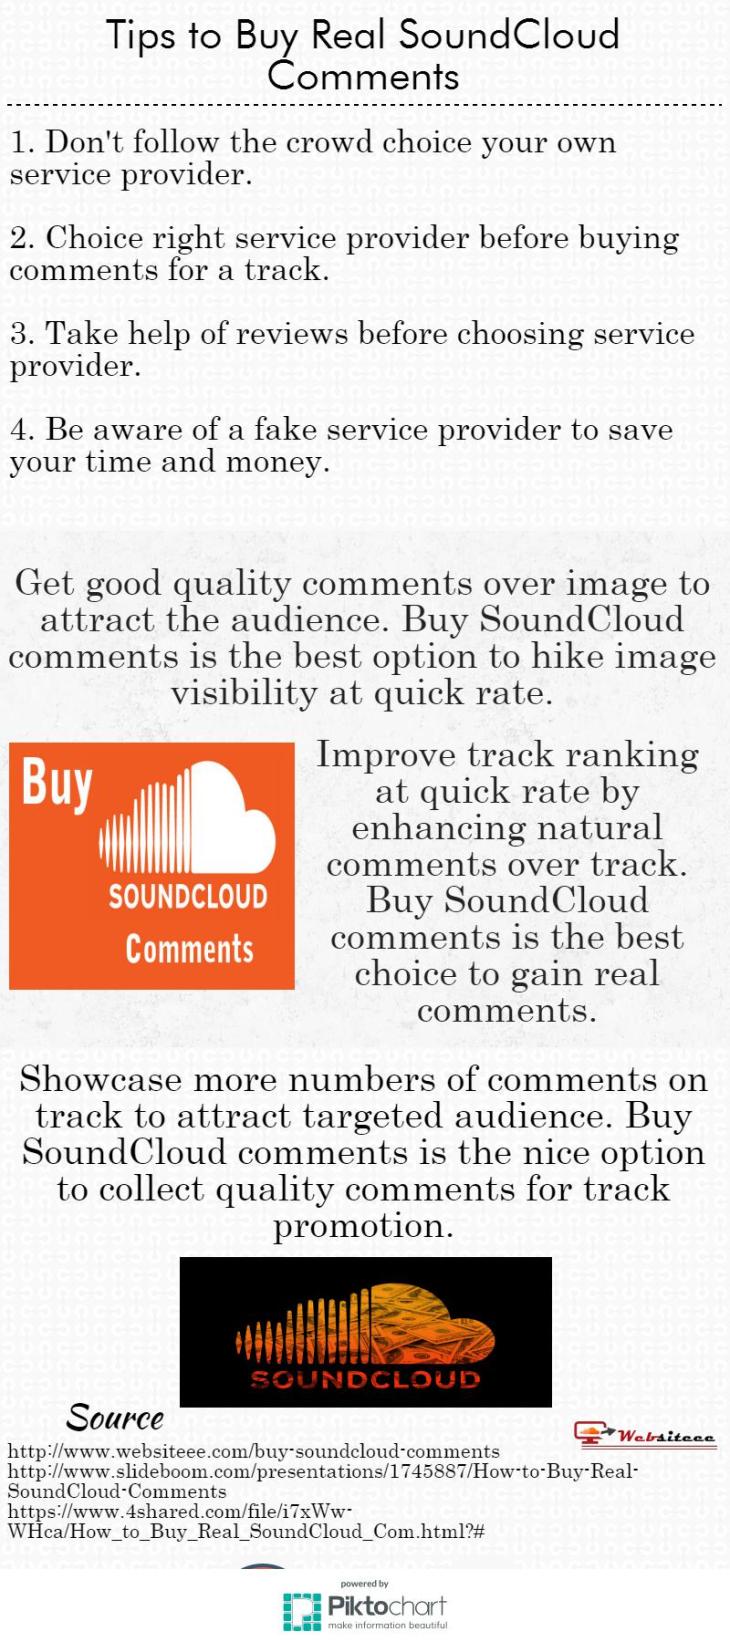 Tips to Buy Real SoundCloud Comments